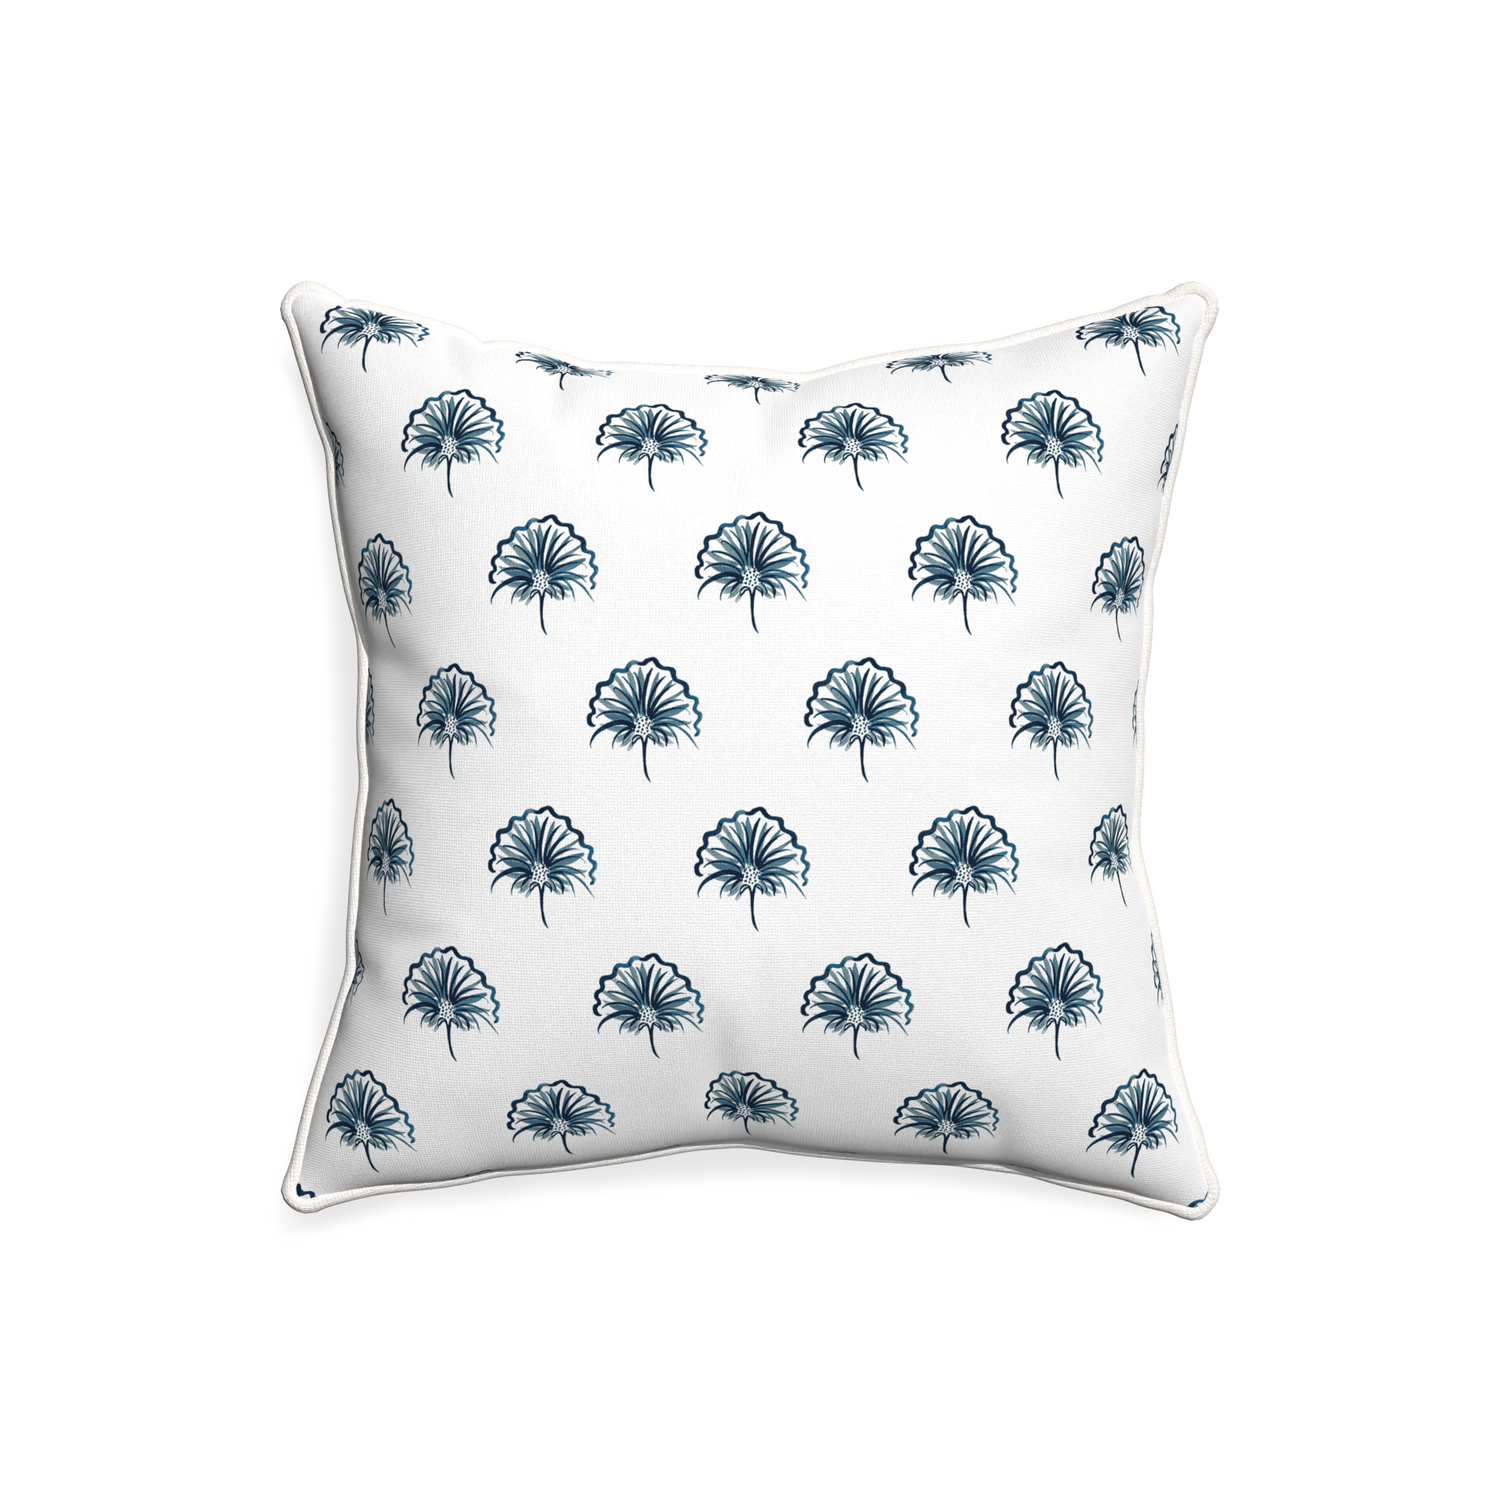 20-square penelope midnight custom floral navypillow with snow piping on white background